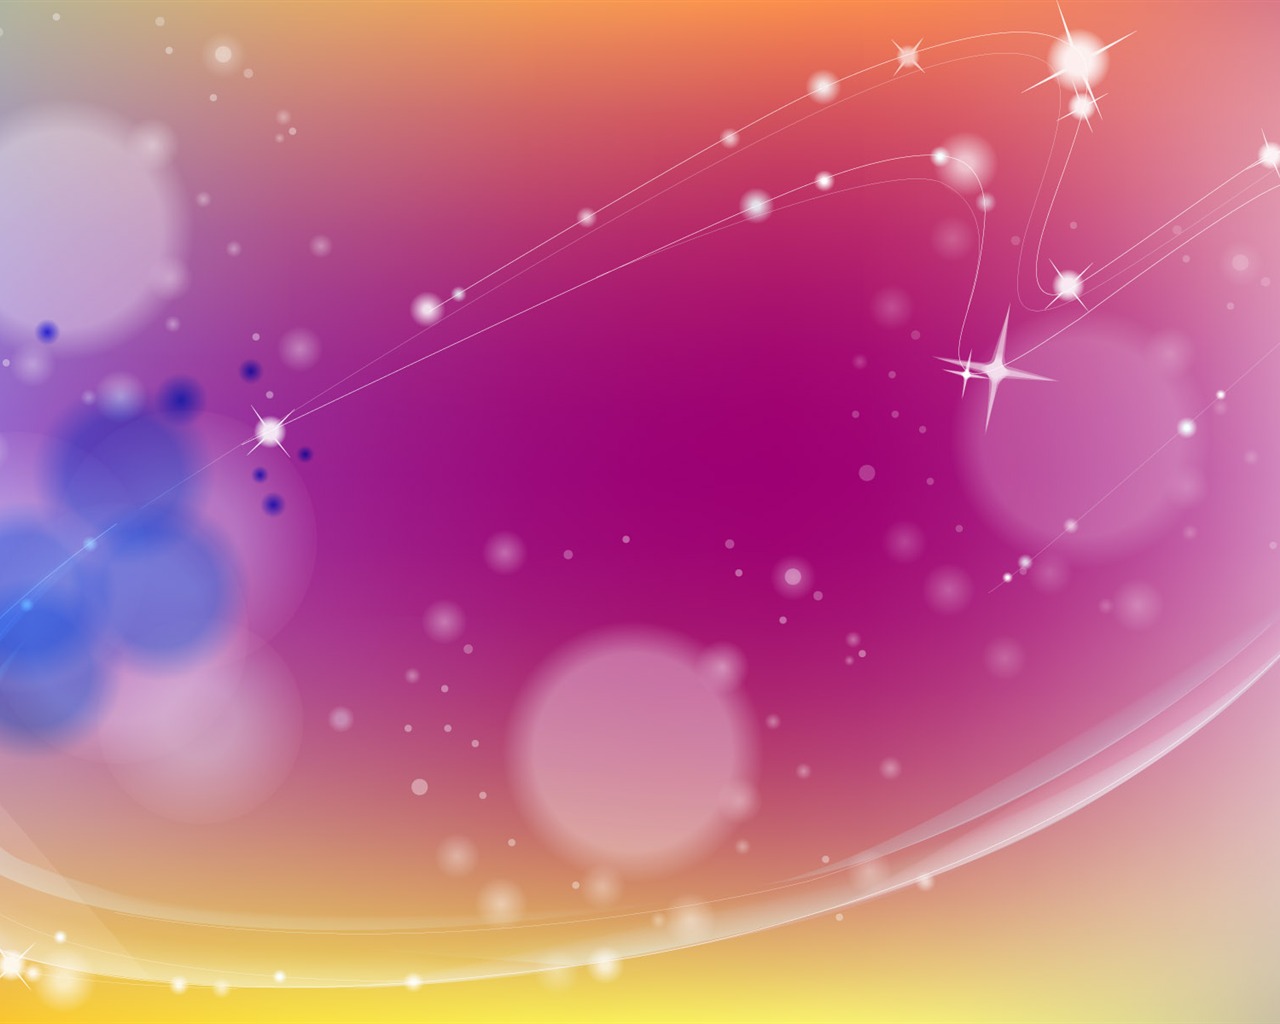 Colorful vector background wallpaper (4) #20 - 1280x1024